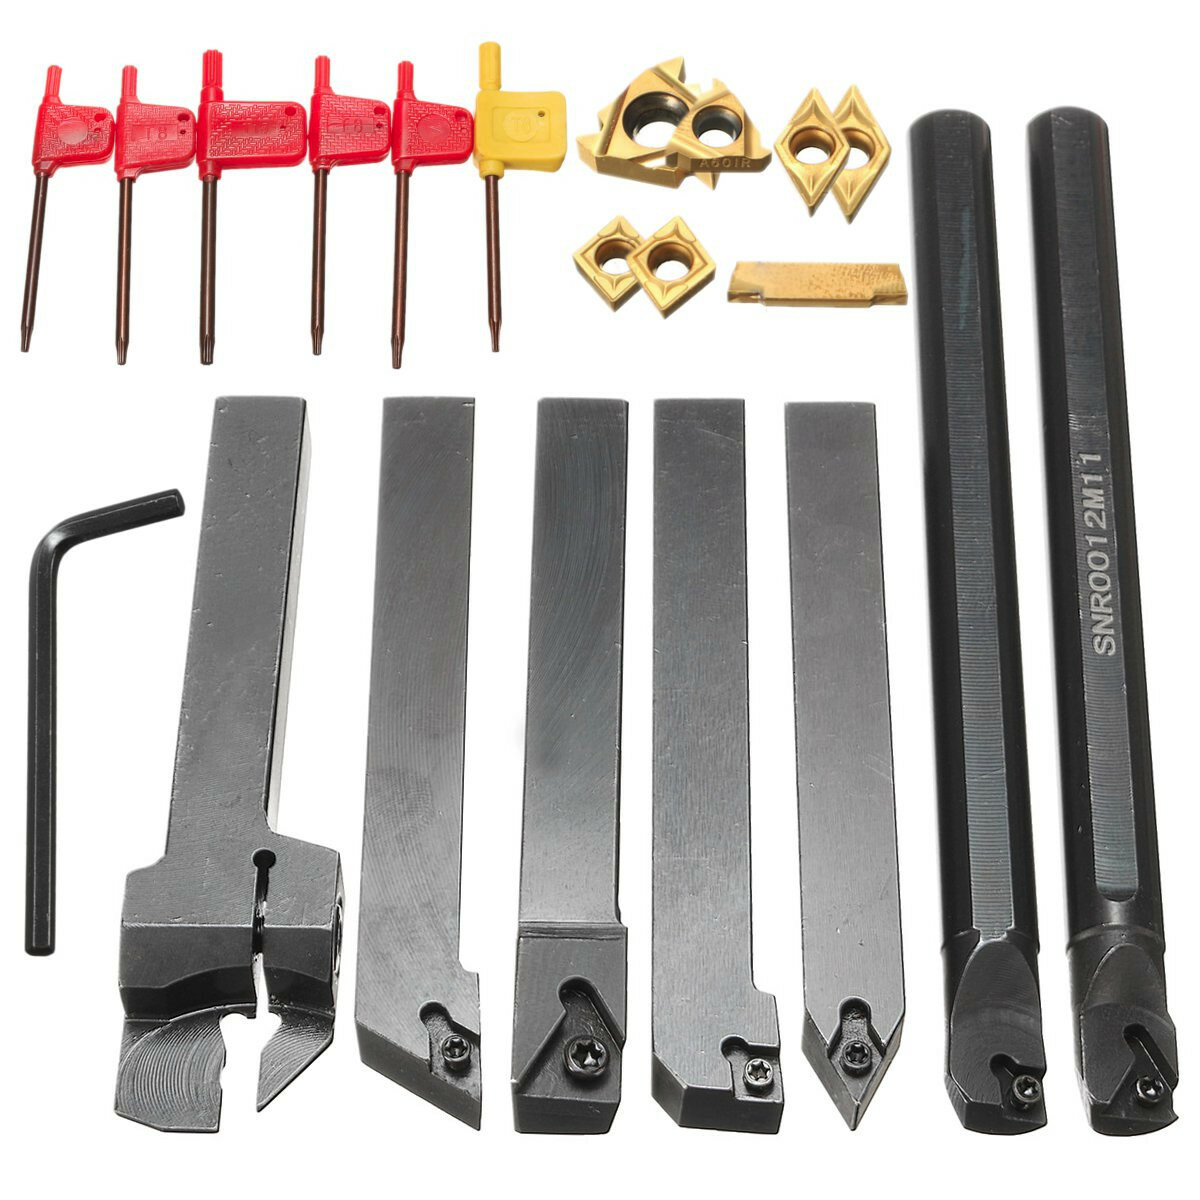 

Drillpro 7pcs 12mm Shank Lathe Set Boring Bar Turning Tool Holder with Carbide Inserts CCMT060204 DCMT070204